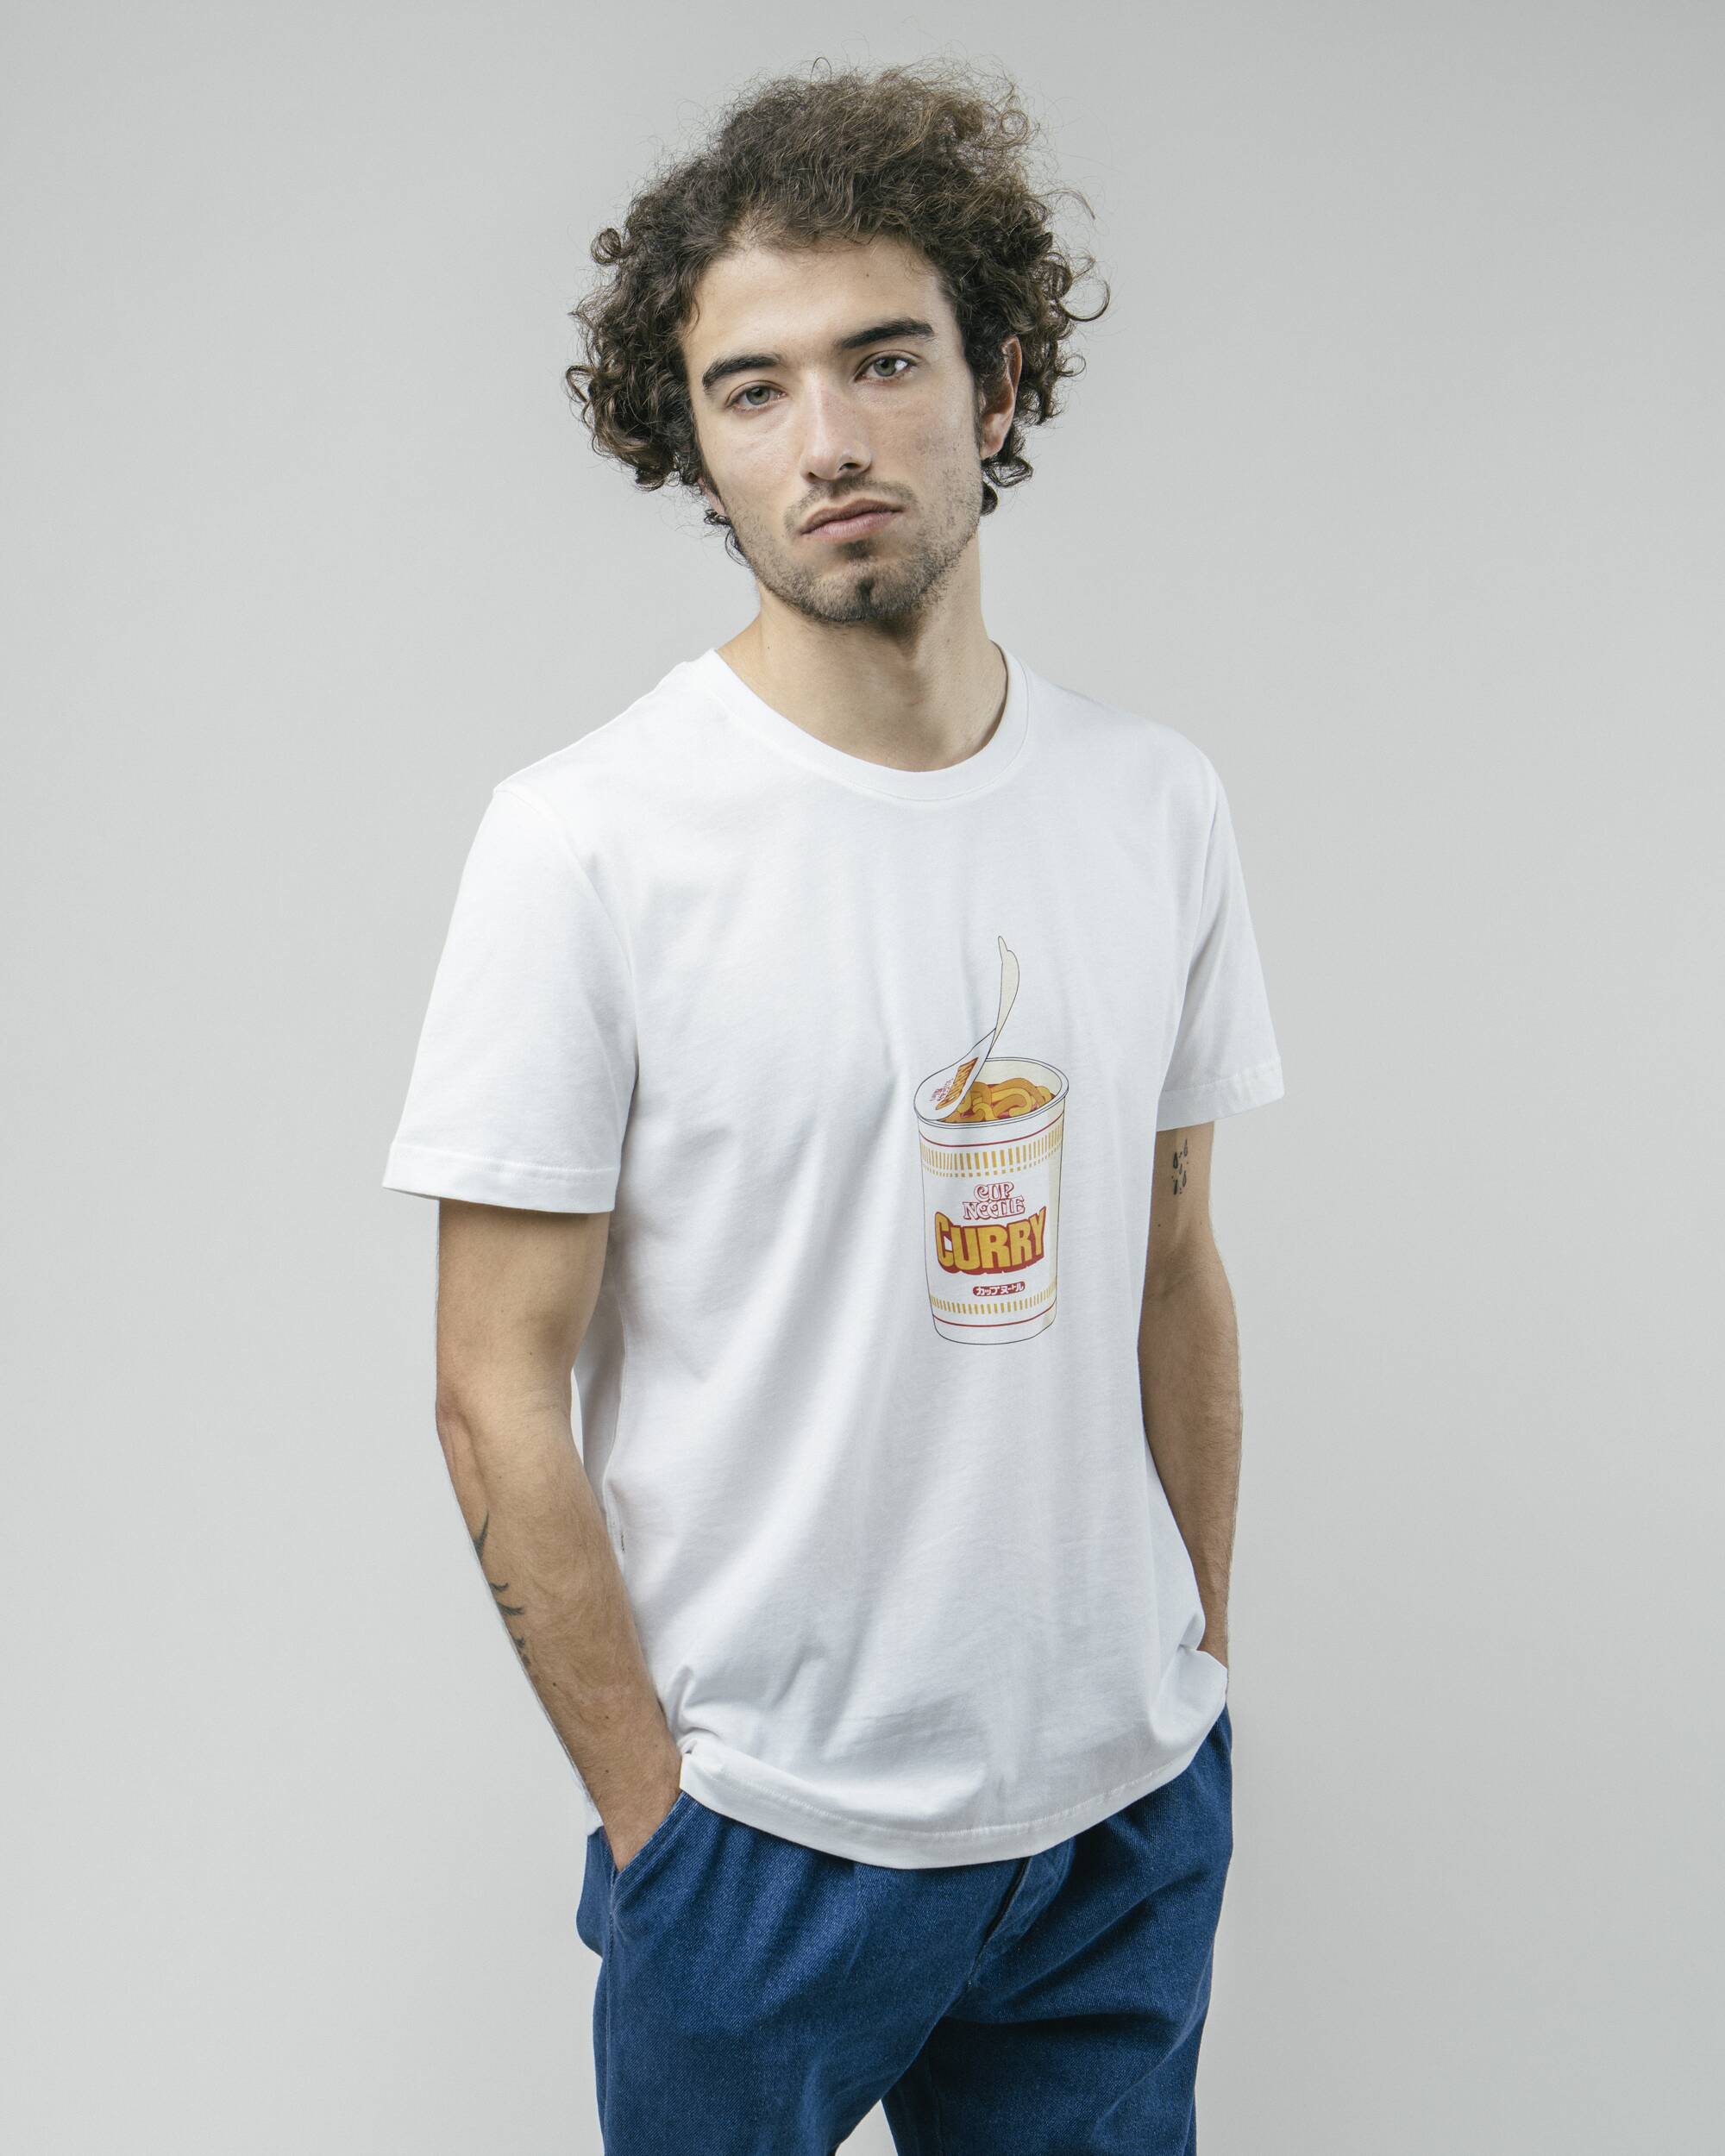 T-shirt "Curry To Go" in white made from 100% organic cotton from Brava Fabrics